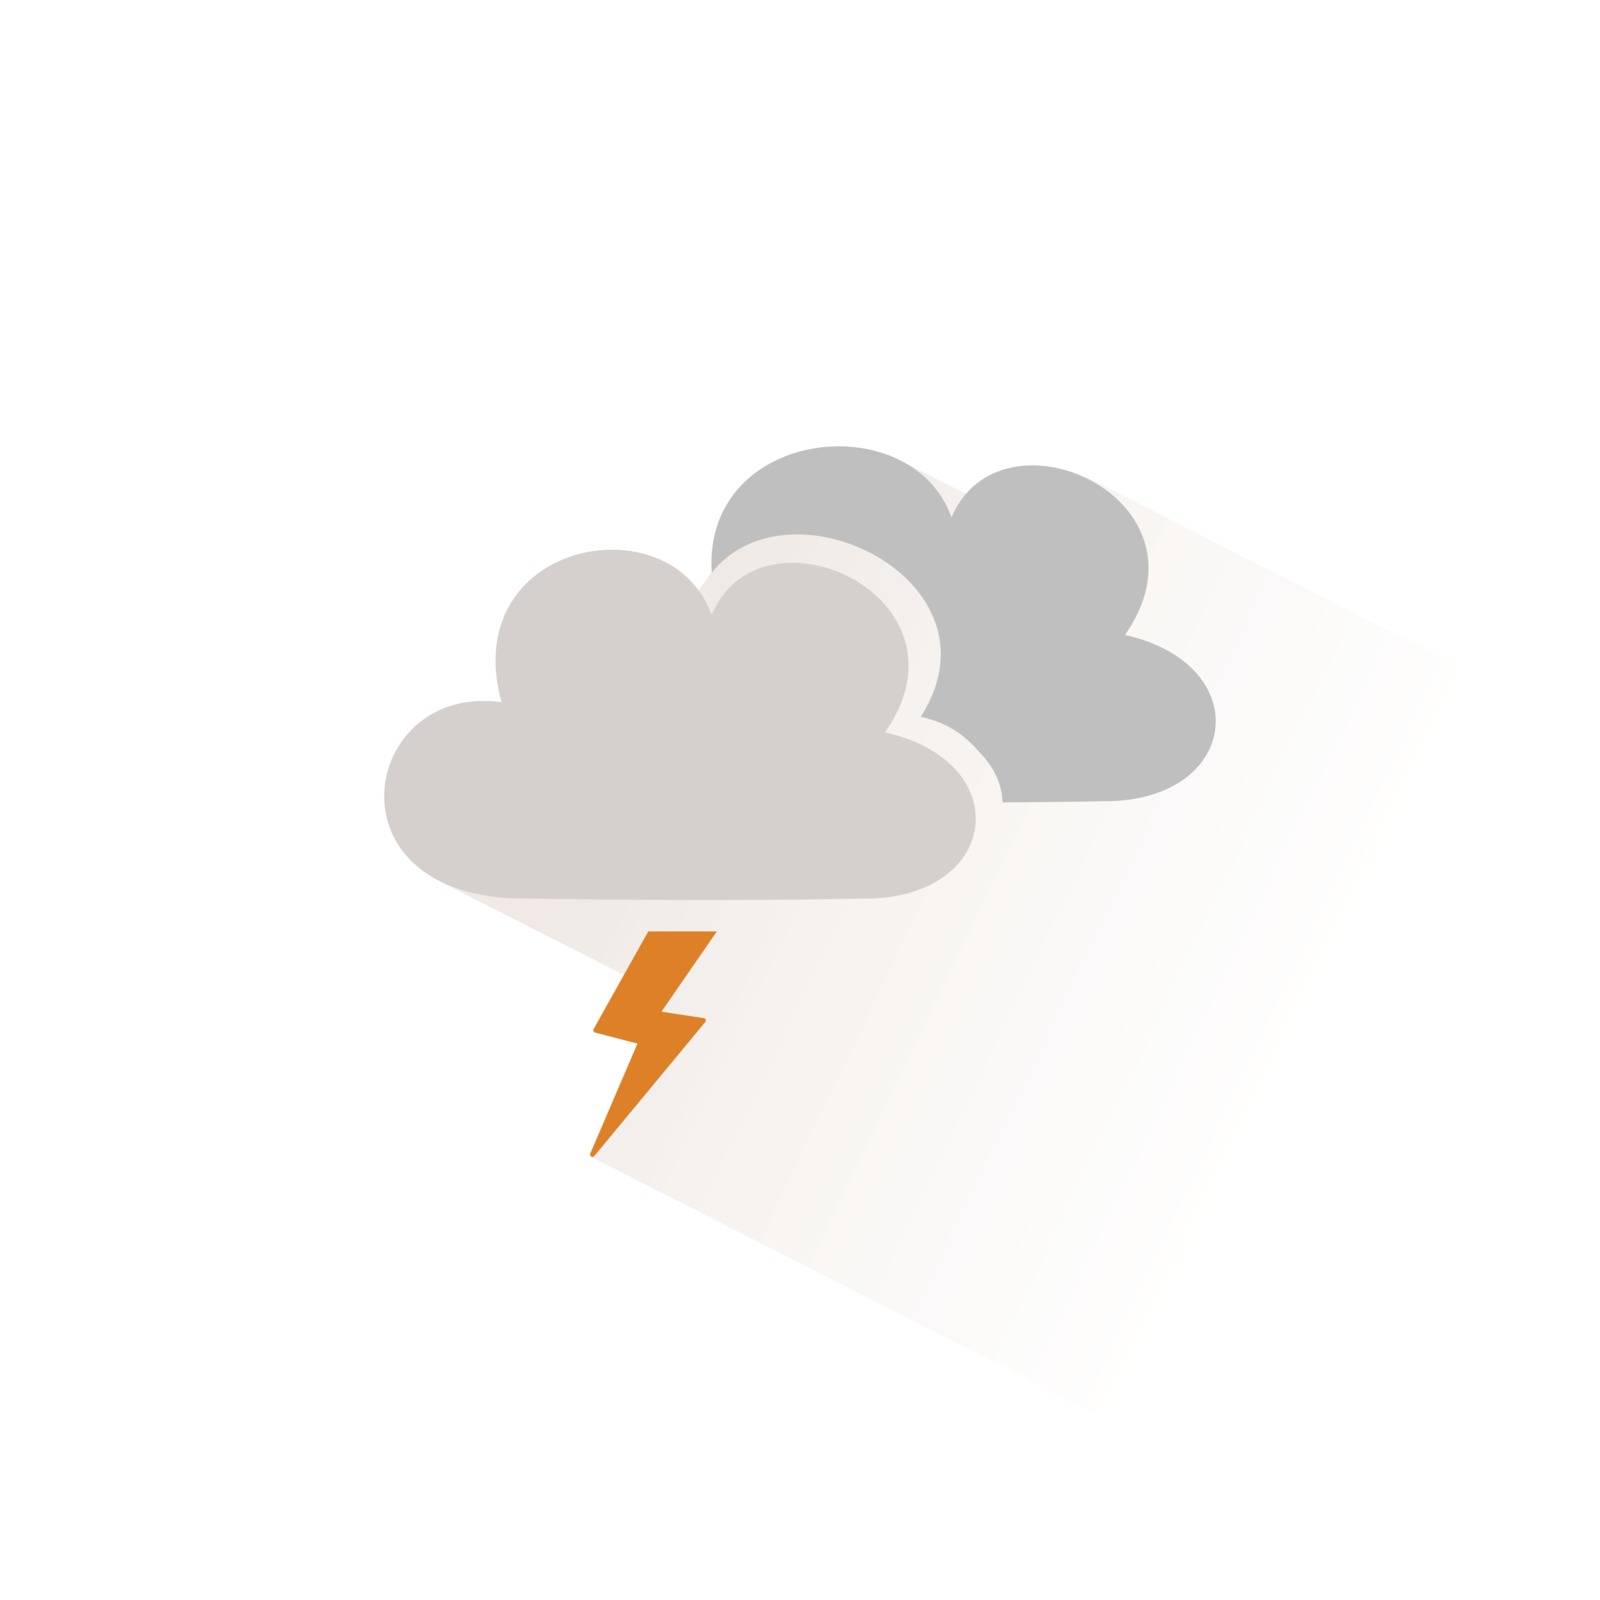 Storm icon with shadow. Flat vector illustration by Imaagio